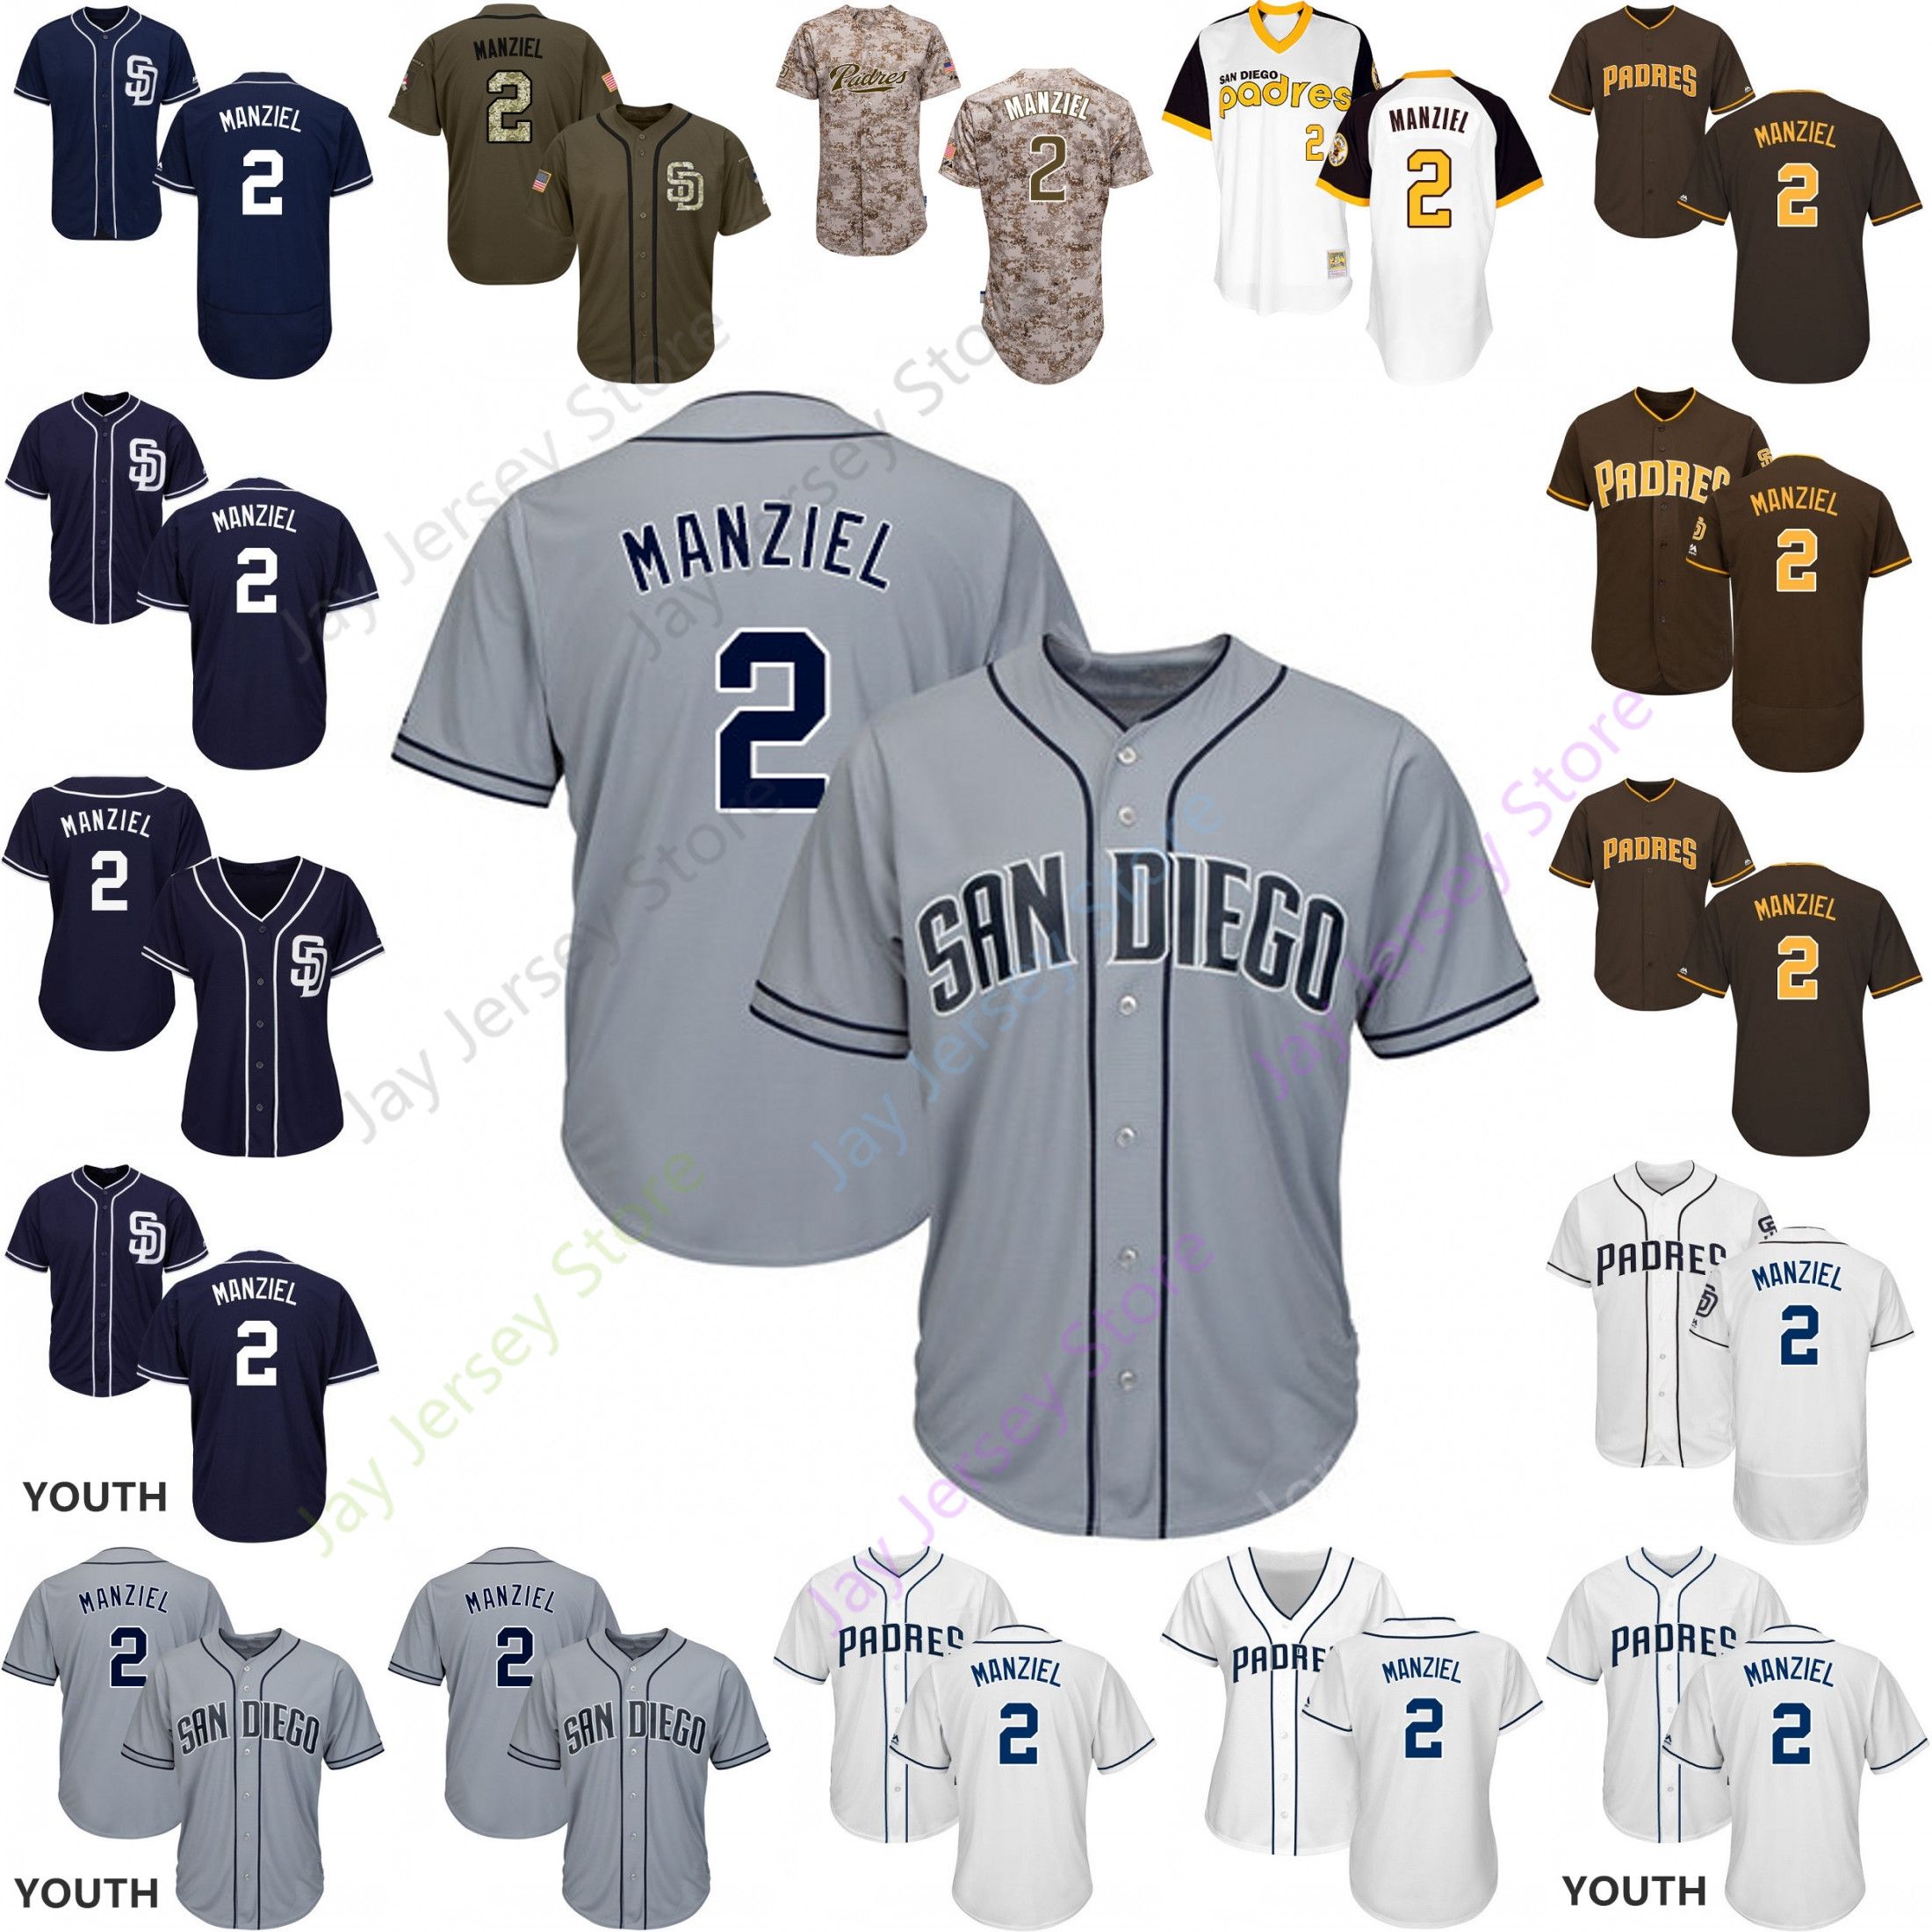 johnny manziel padres jersey for sale